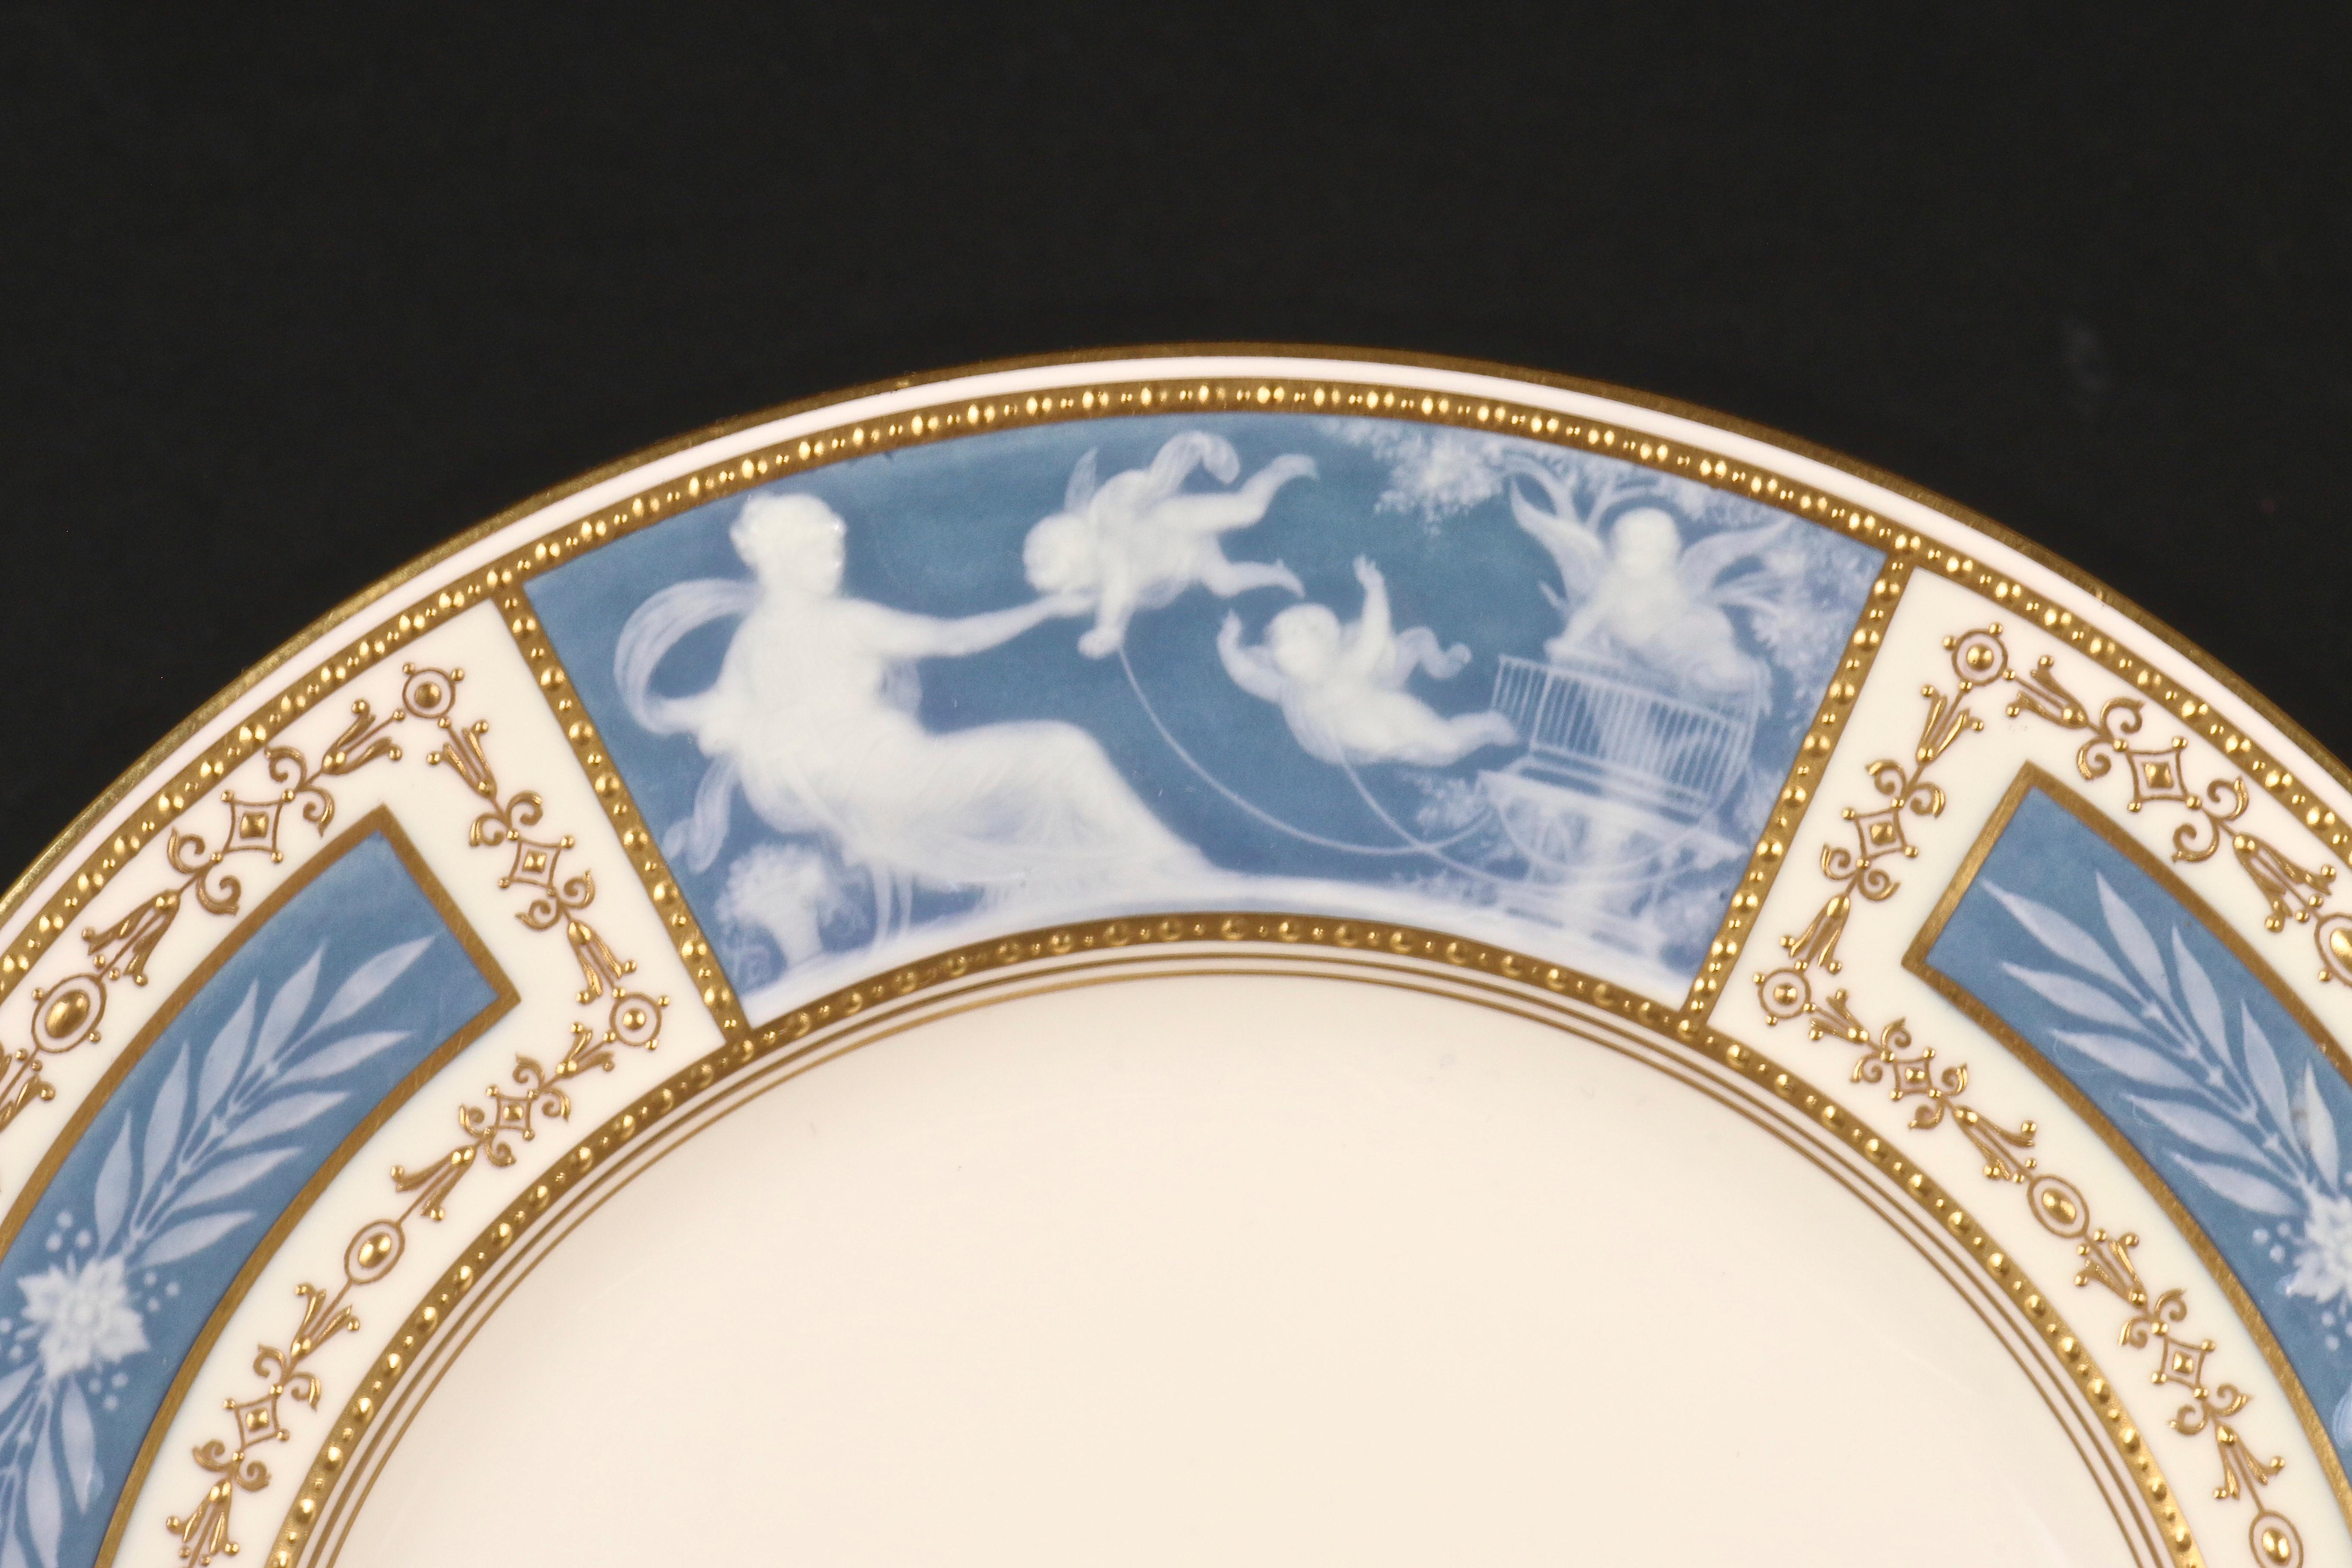 Early 20th Century 8 Minton Pate-sur-pate Blue Plates for Tiffany, by Artist Albion Birks